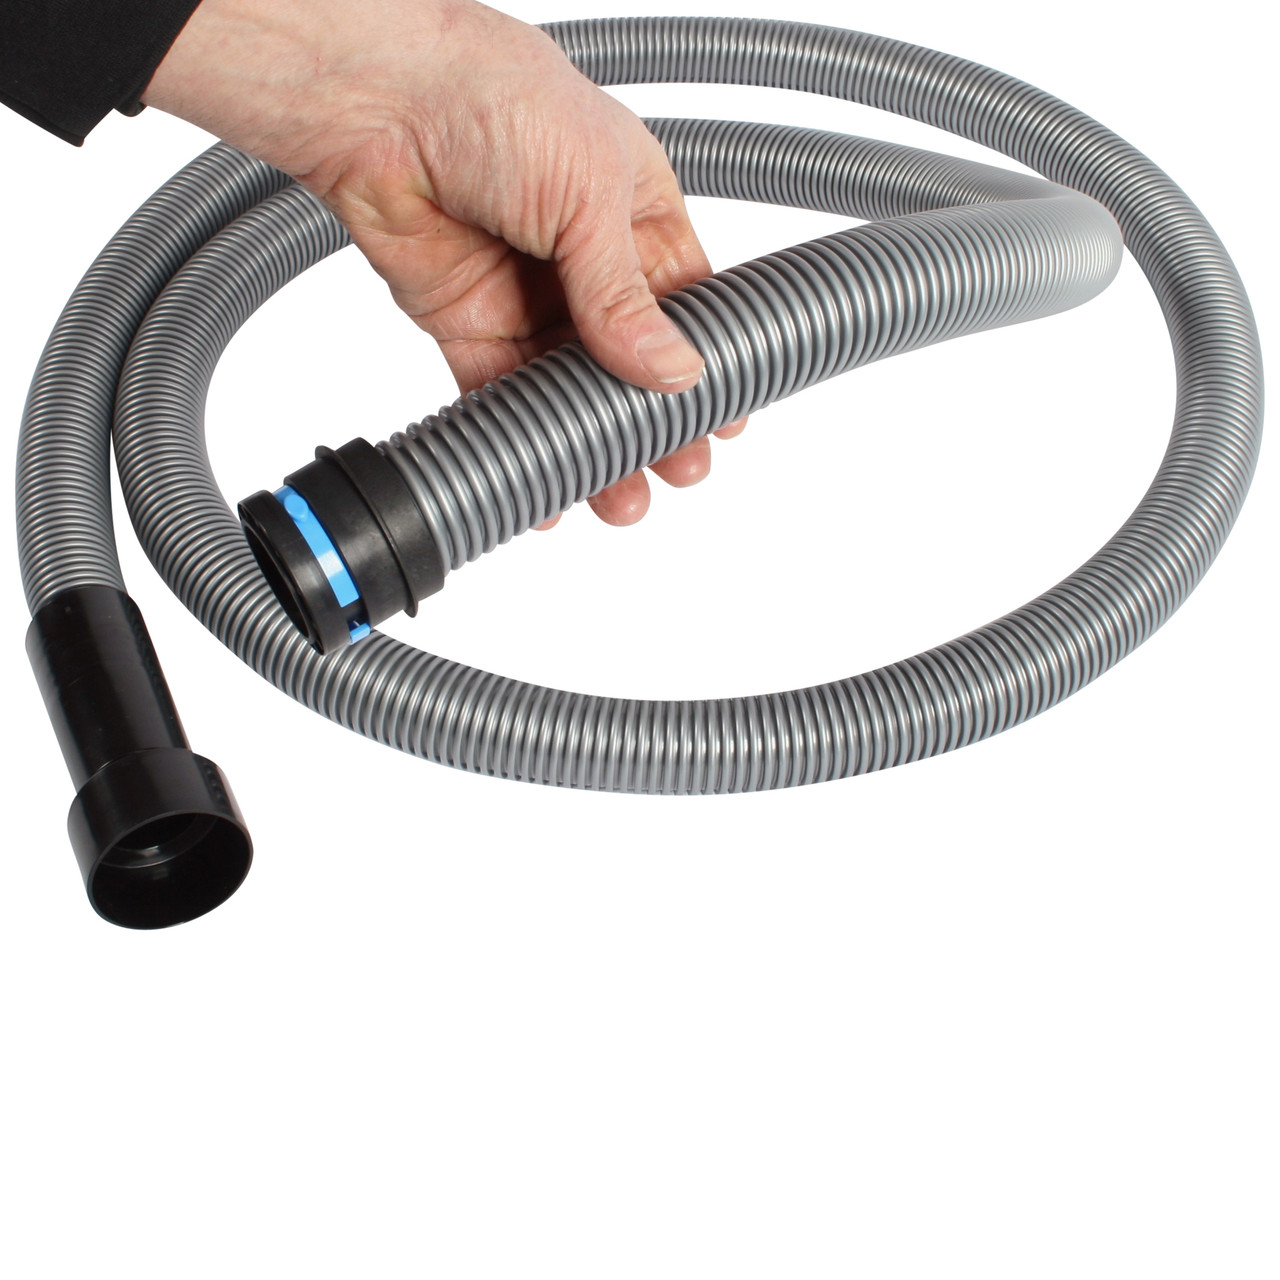 1.25 Inch Hose for Home & Workshop Shop Vacuum to Connect to Quick Click  Multi-brand Power Tools for Dust Collection - Cen-Tec Systems